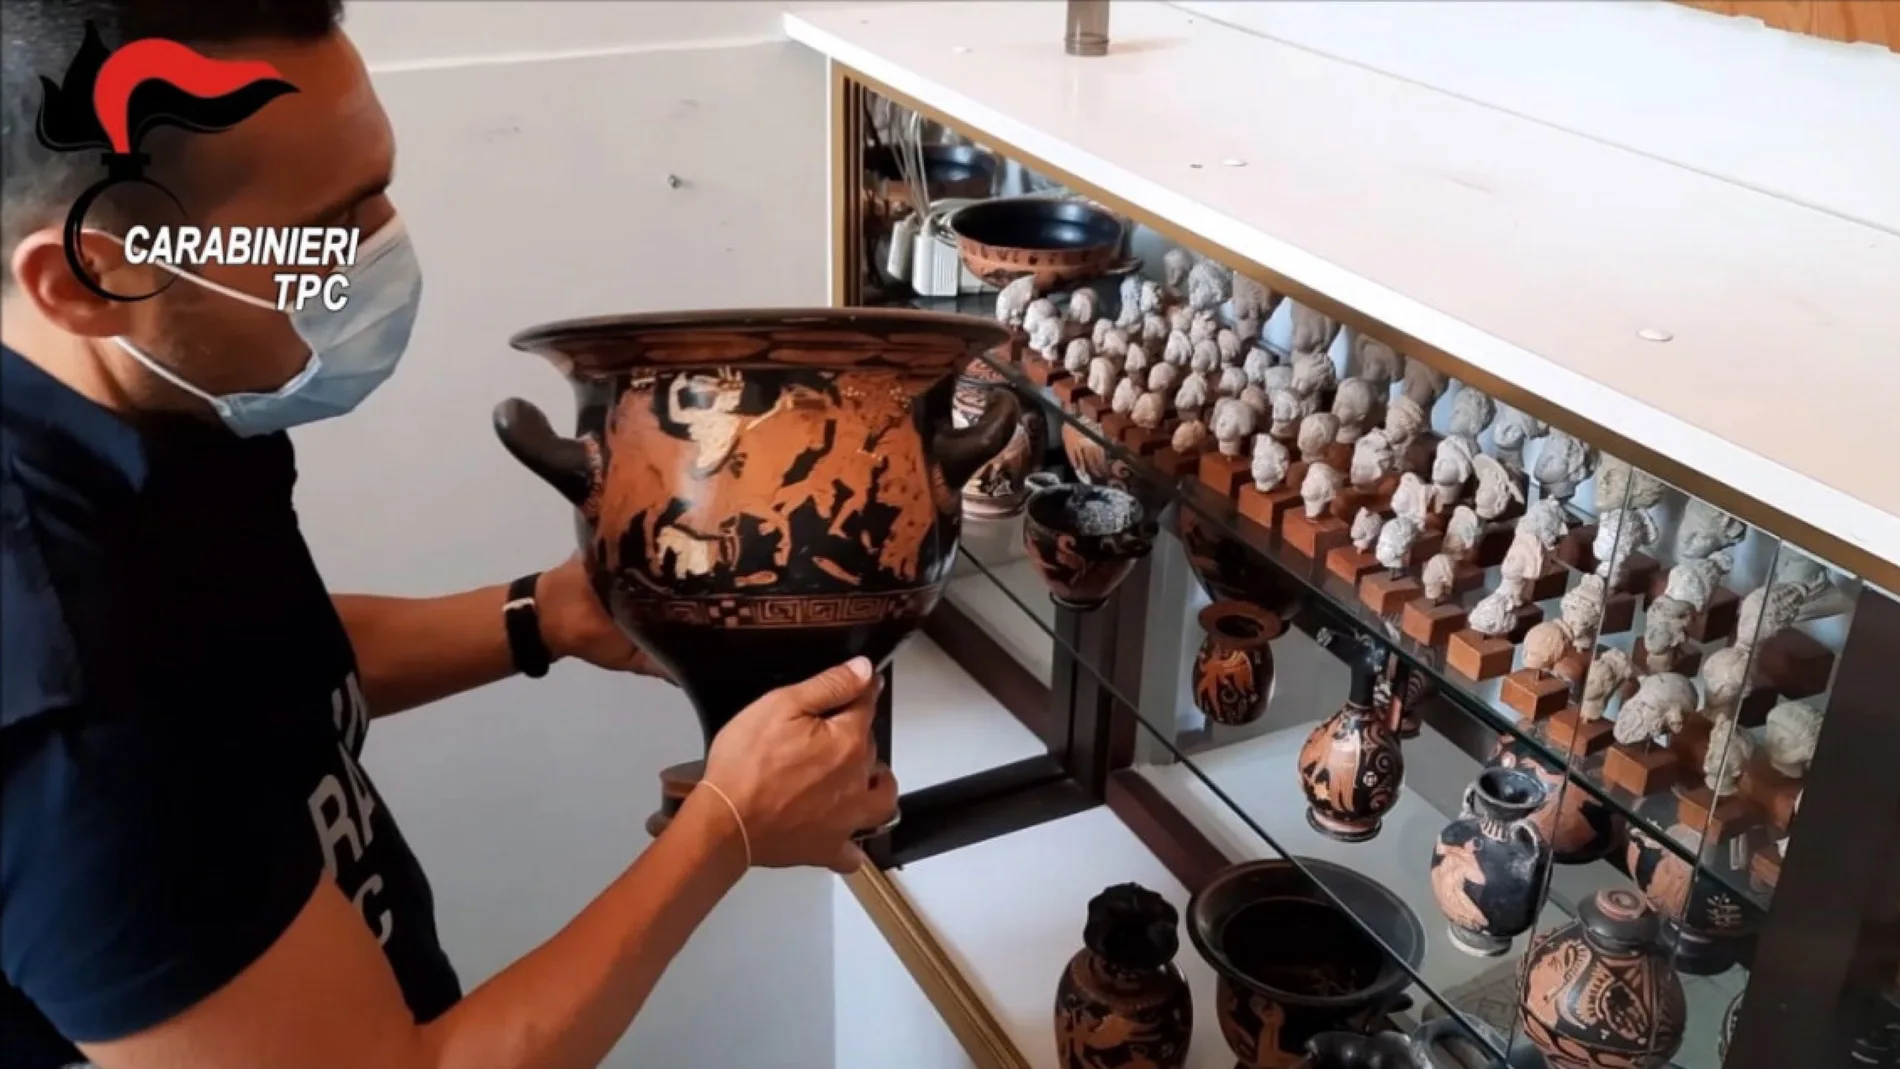 Artifacts seized from a collector in Belgium have been brought back to Bari